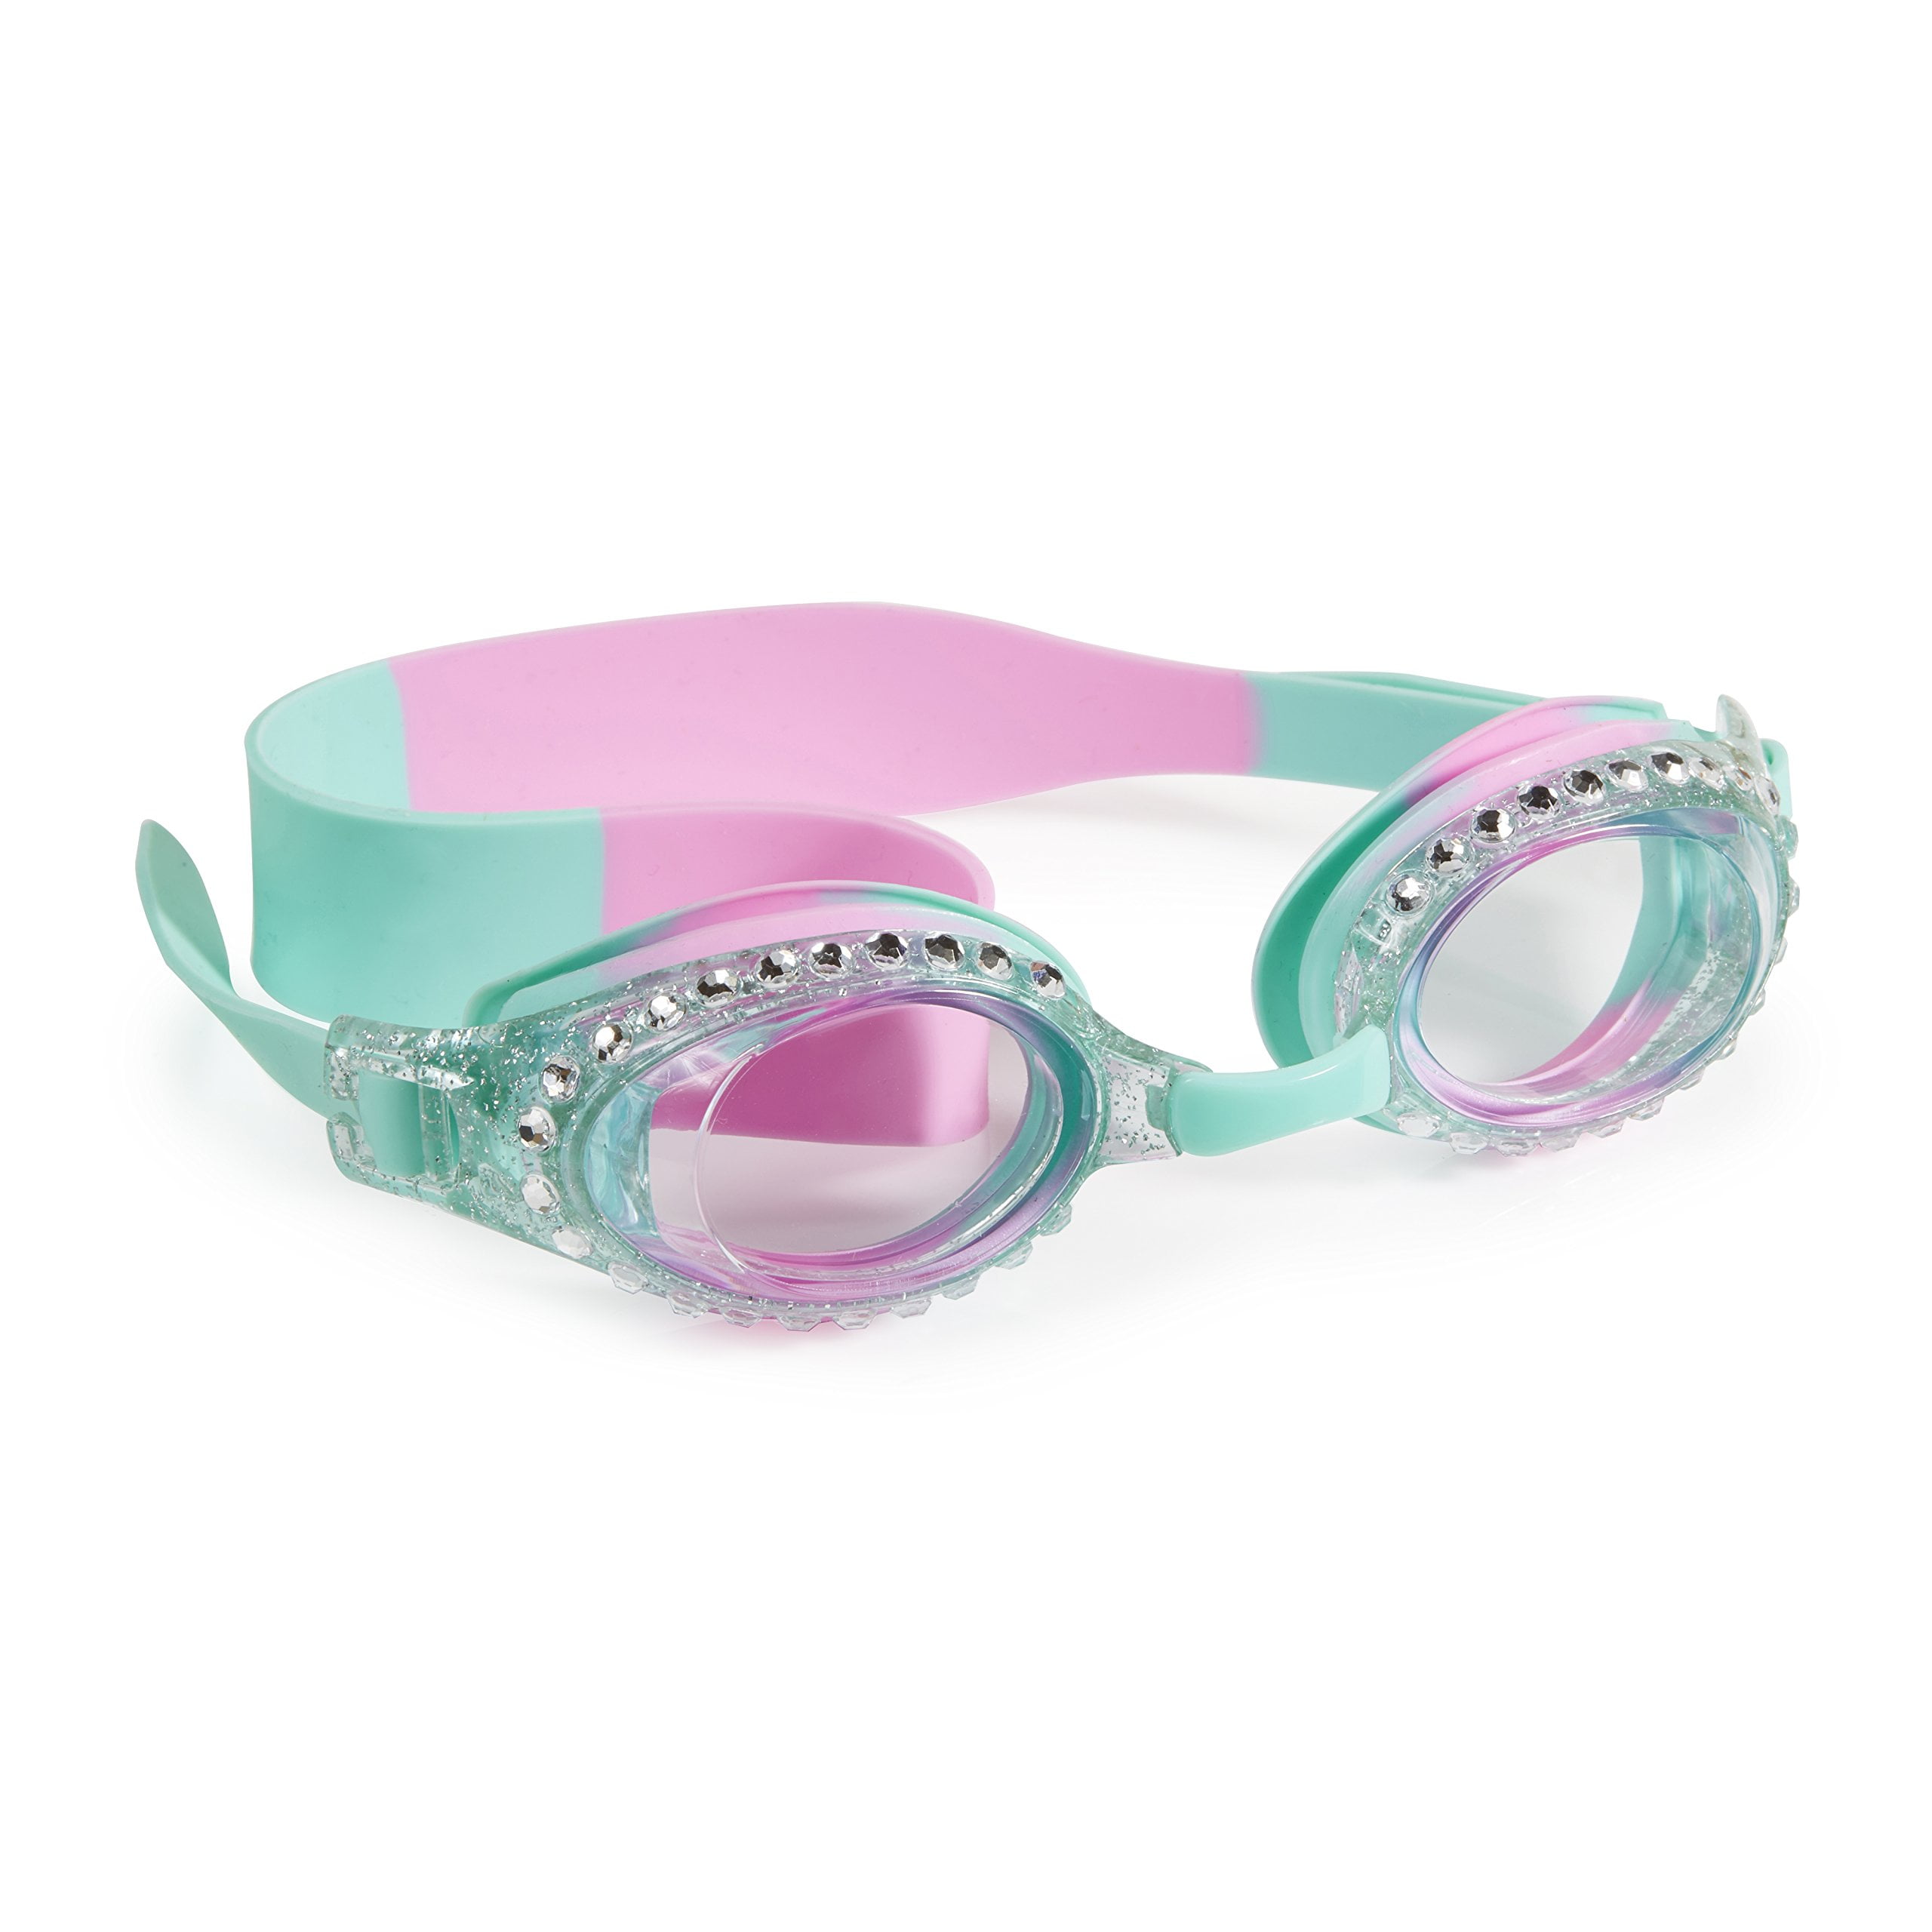 Anti Fog Non Slip and UV Protection Cat Shaped Swimming Goggles for Kids by Bling2O Purrfect Pink Colored Fun Water Accessory Includes Hard Case No Leak